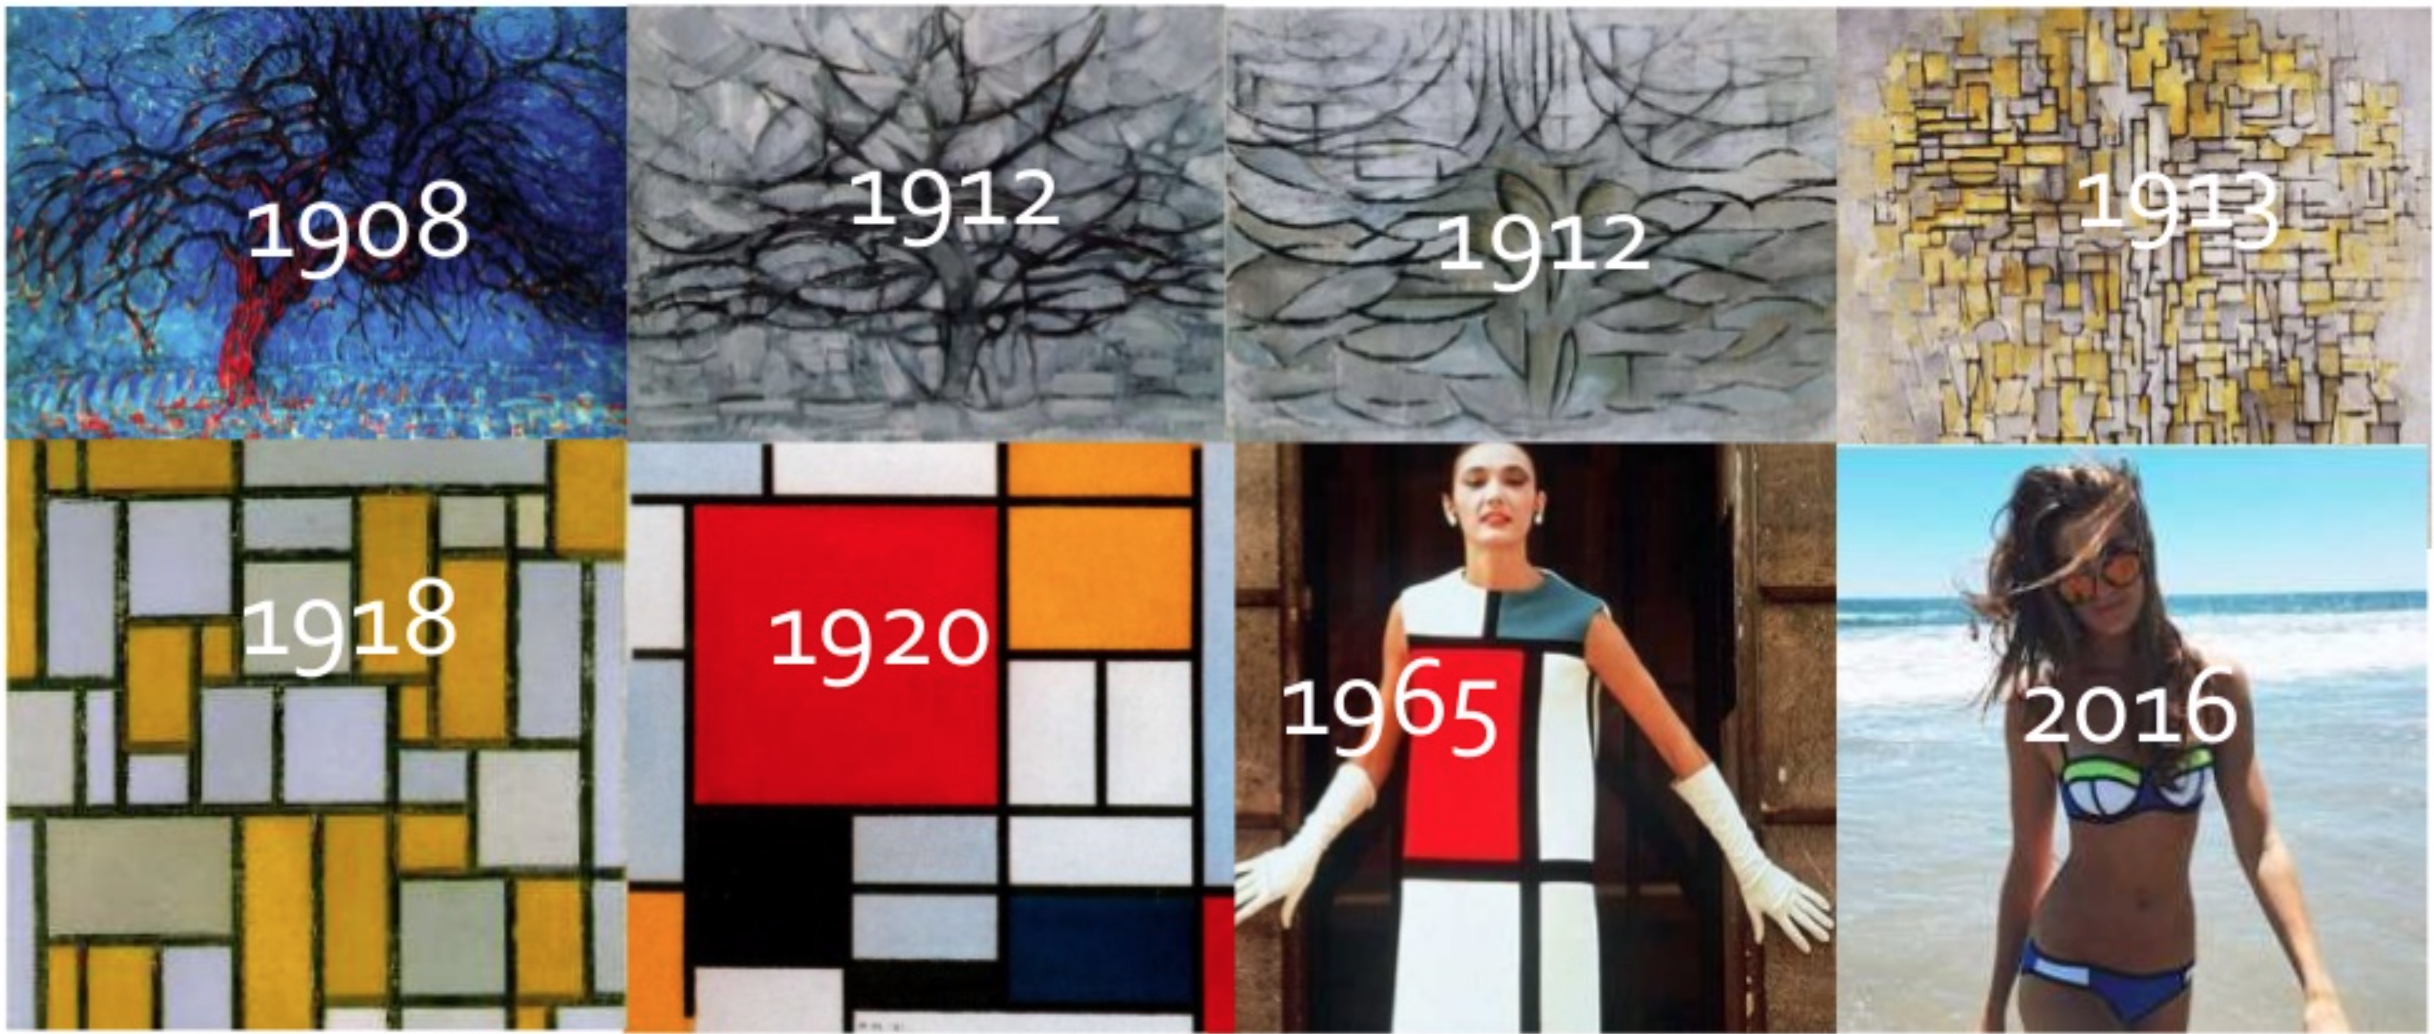 Mondrian. From creative moments to an innovation.